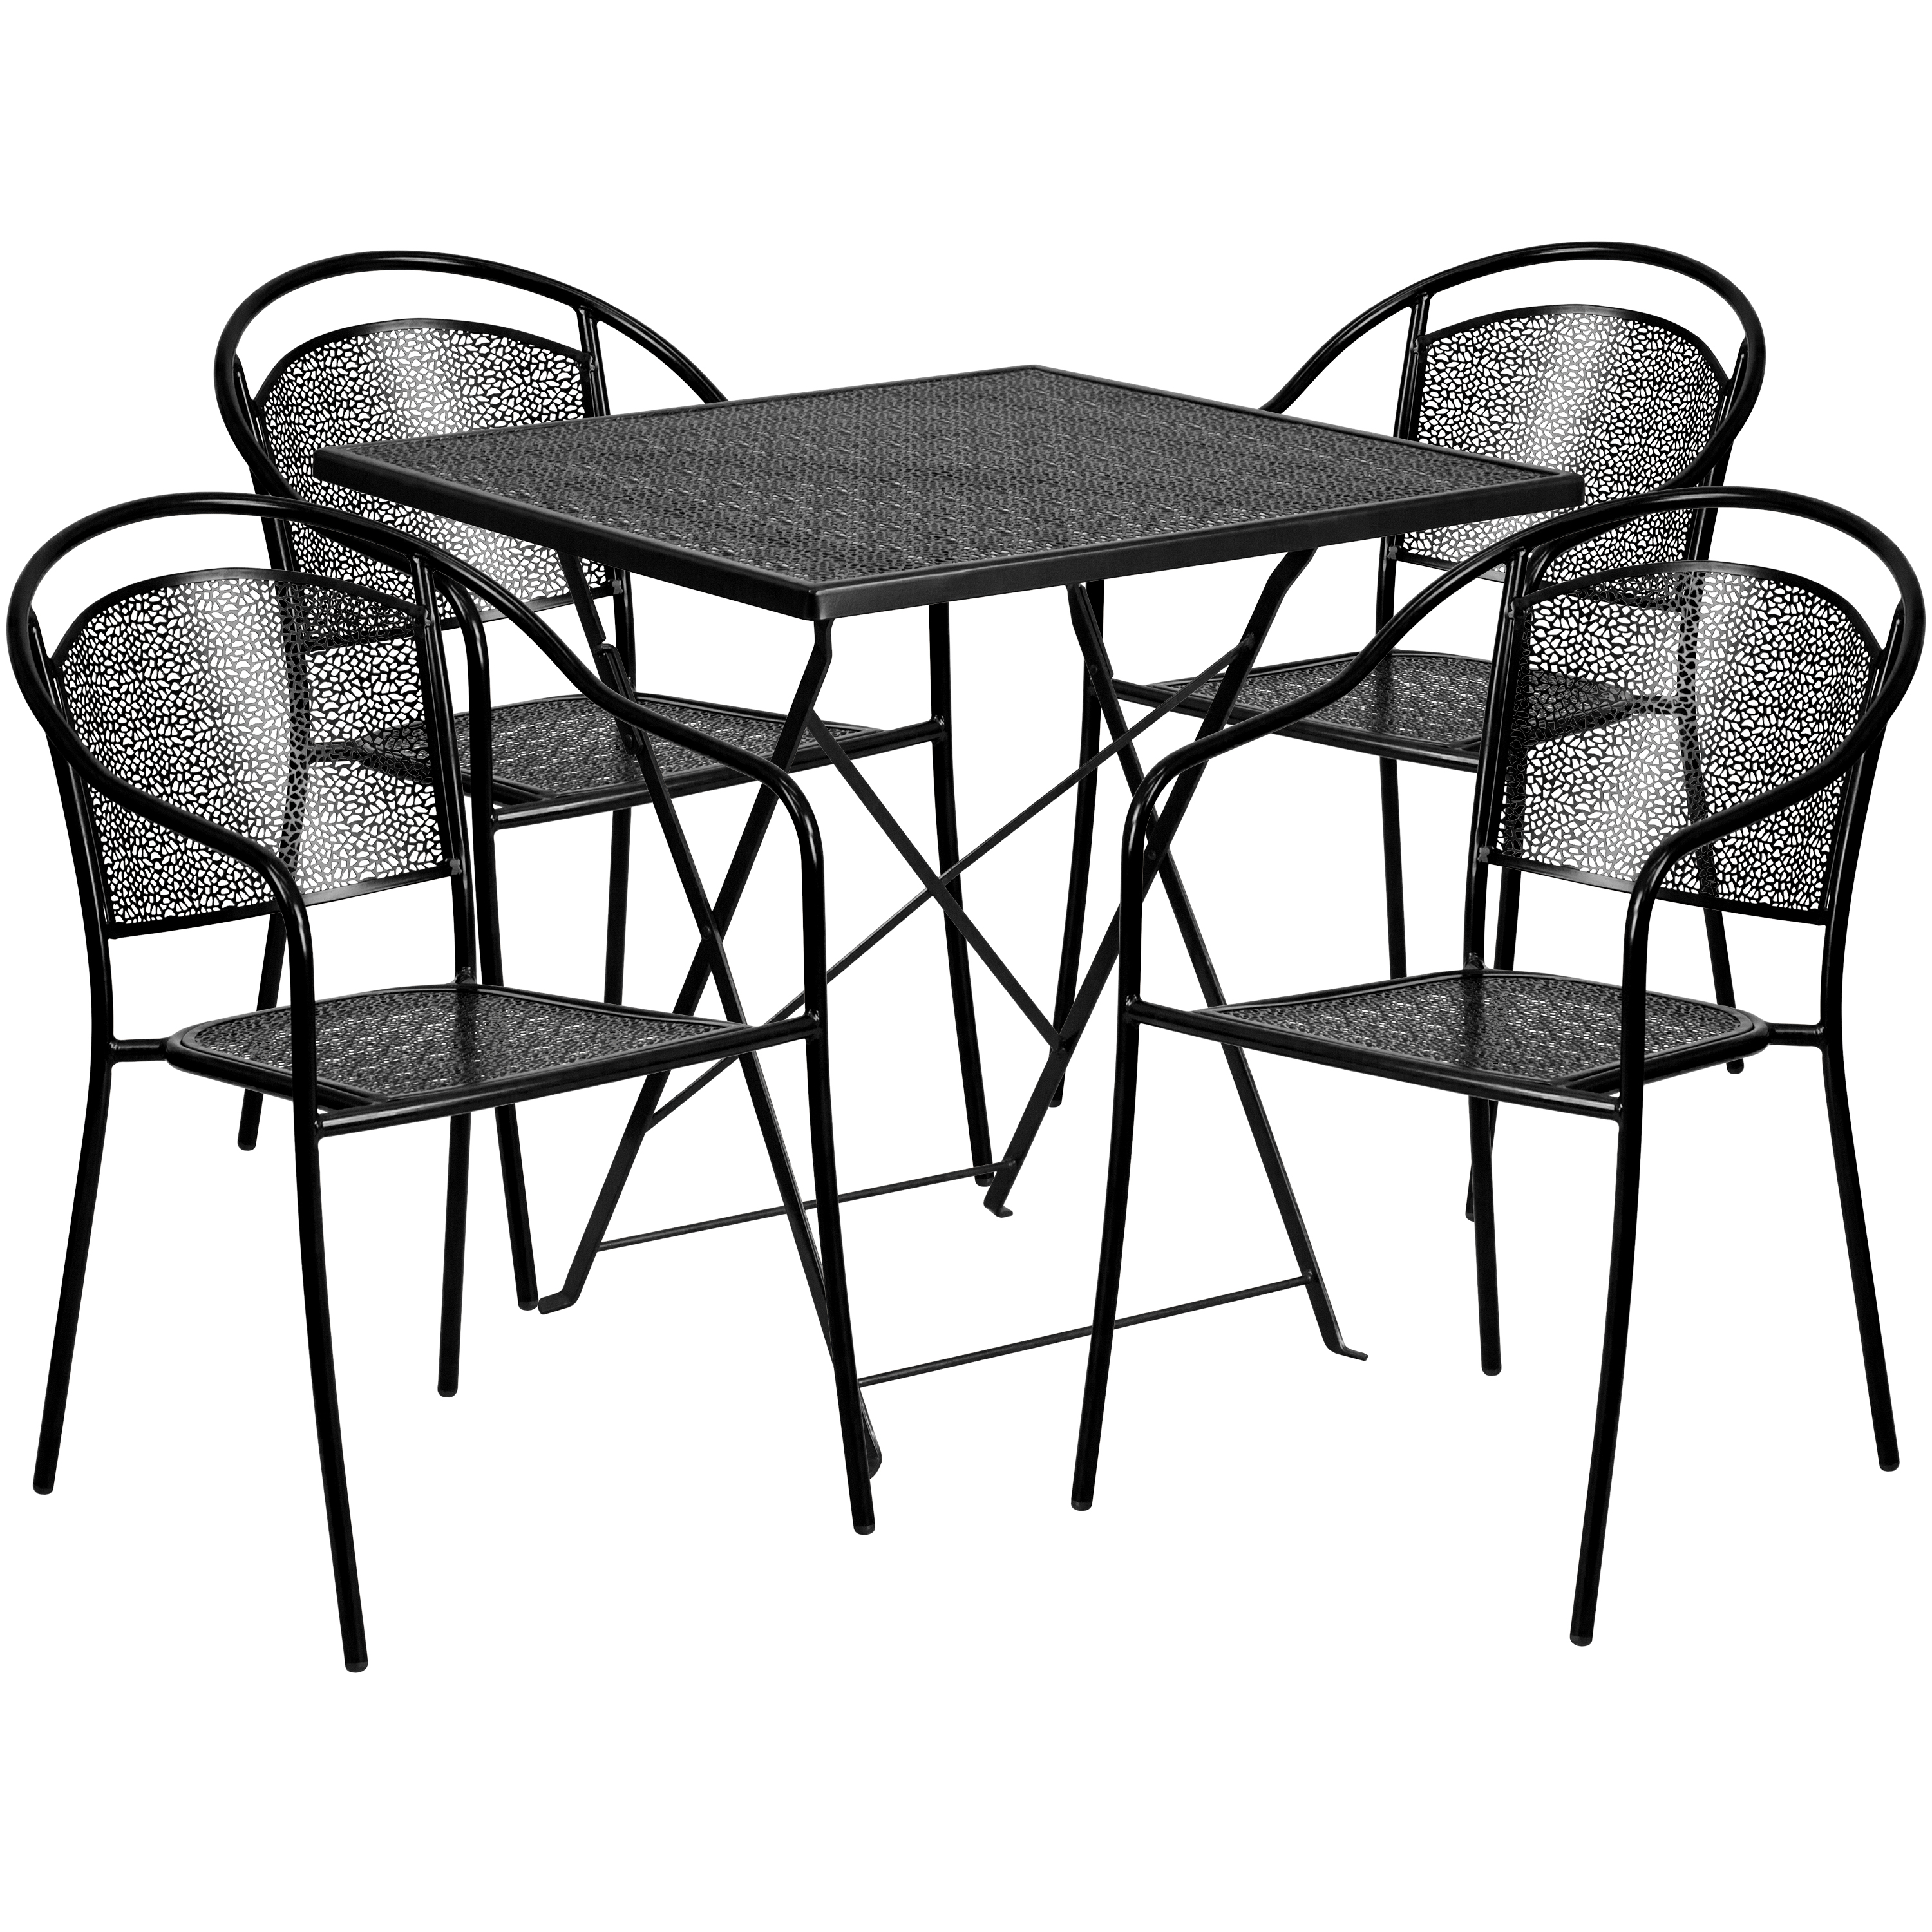 Flash Furniture Oia Commercial Grade 28" Square Black Indoor-Outdoor Steel Folding Patio Table Set with 4 Round Back Chairs - image 1 of 5